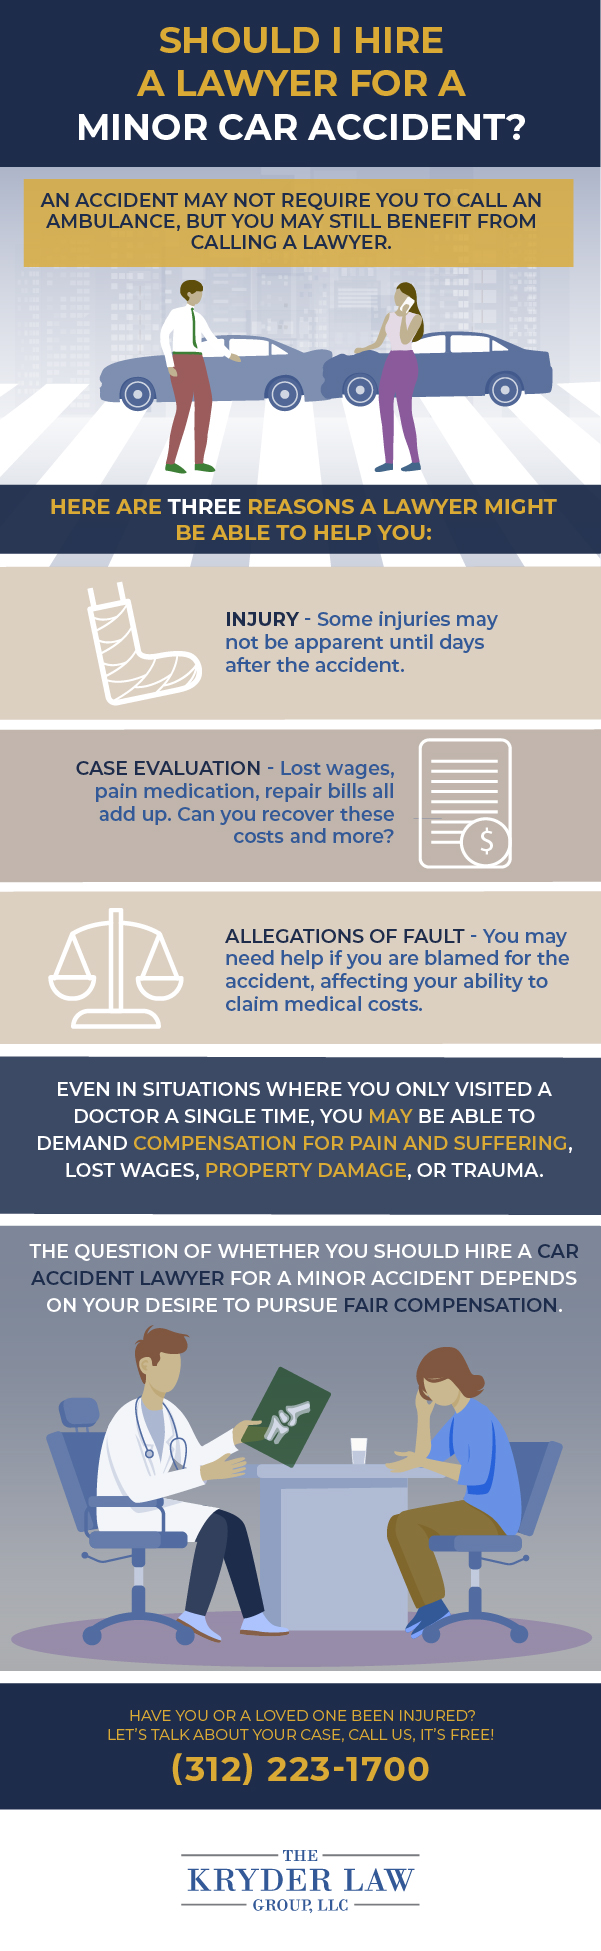 Should I Hire a Lawyer for a Minor Car Accident Infographic